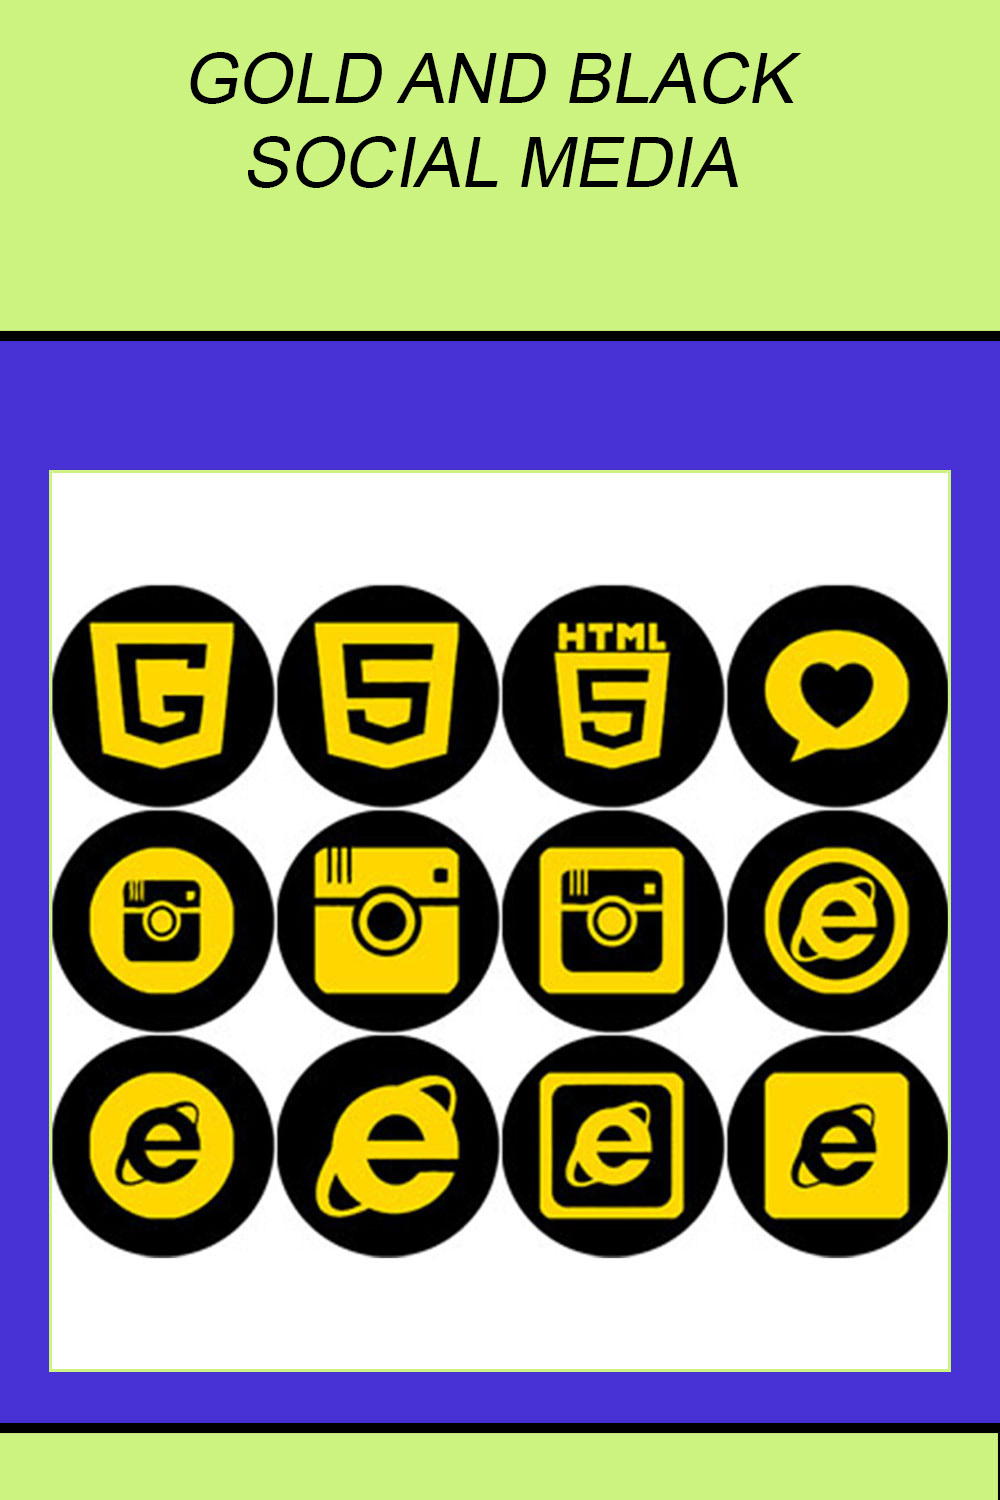 GOLD AND BLACK SOCIAL MEDIA ROUND ICONS pinterest preview image.